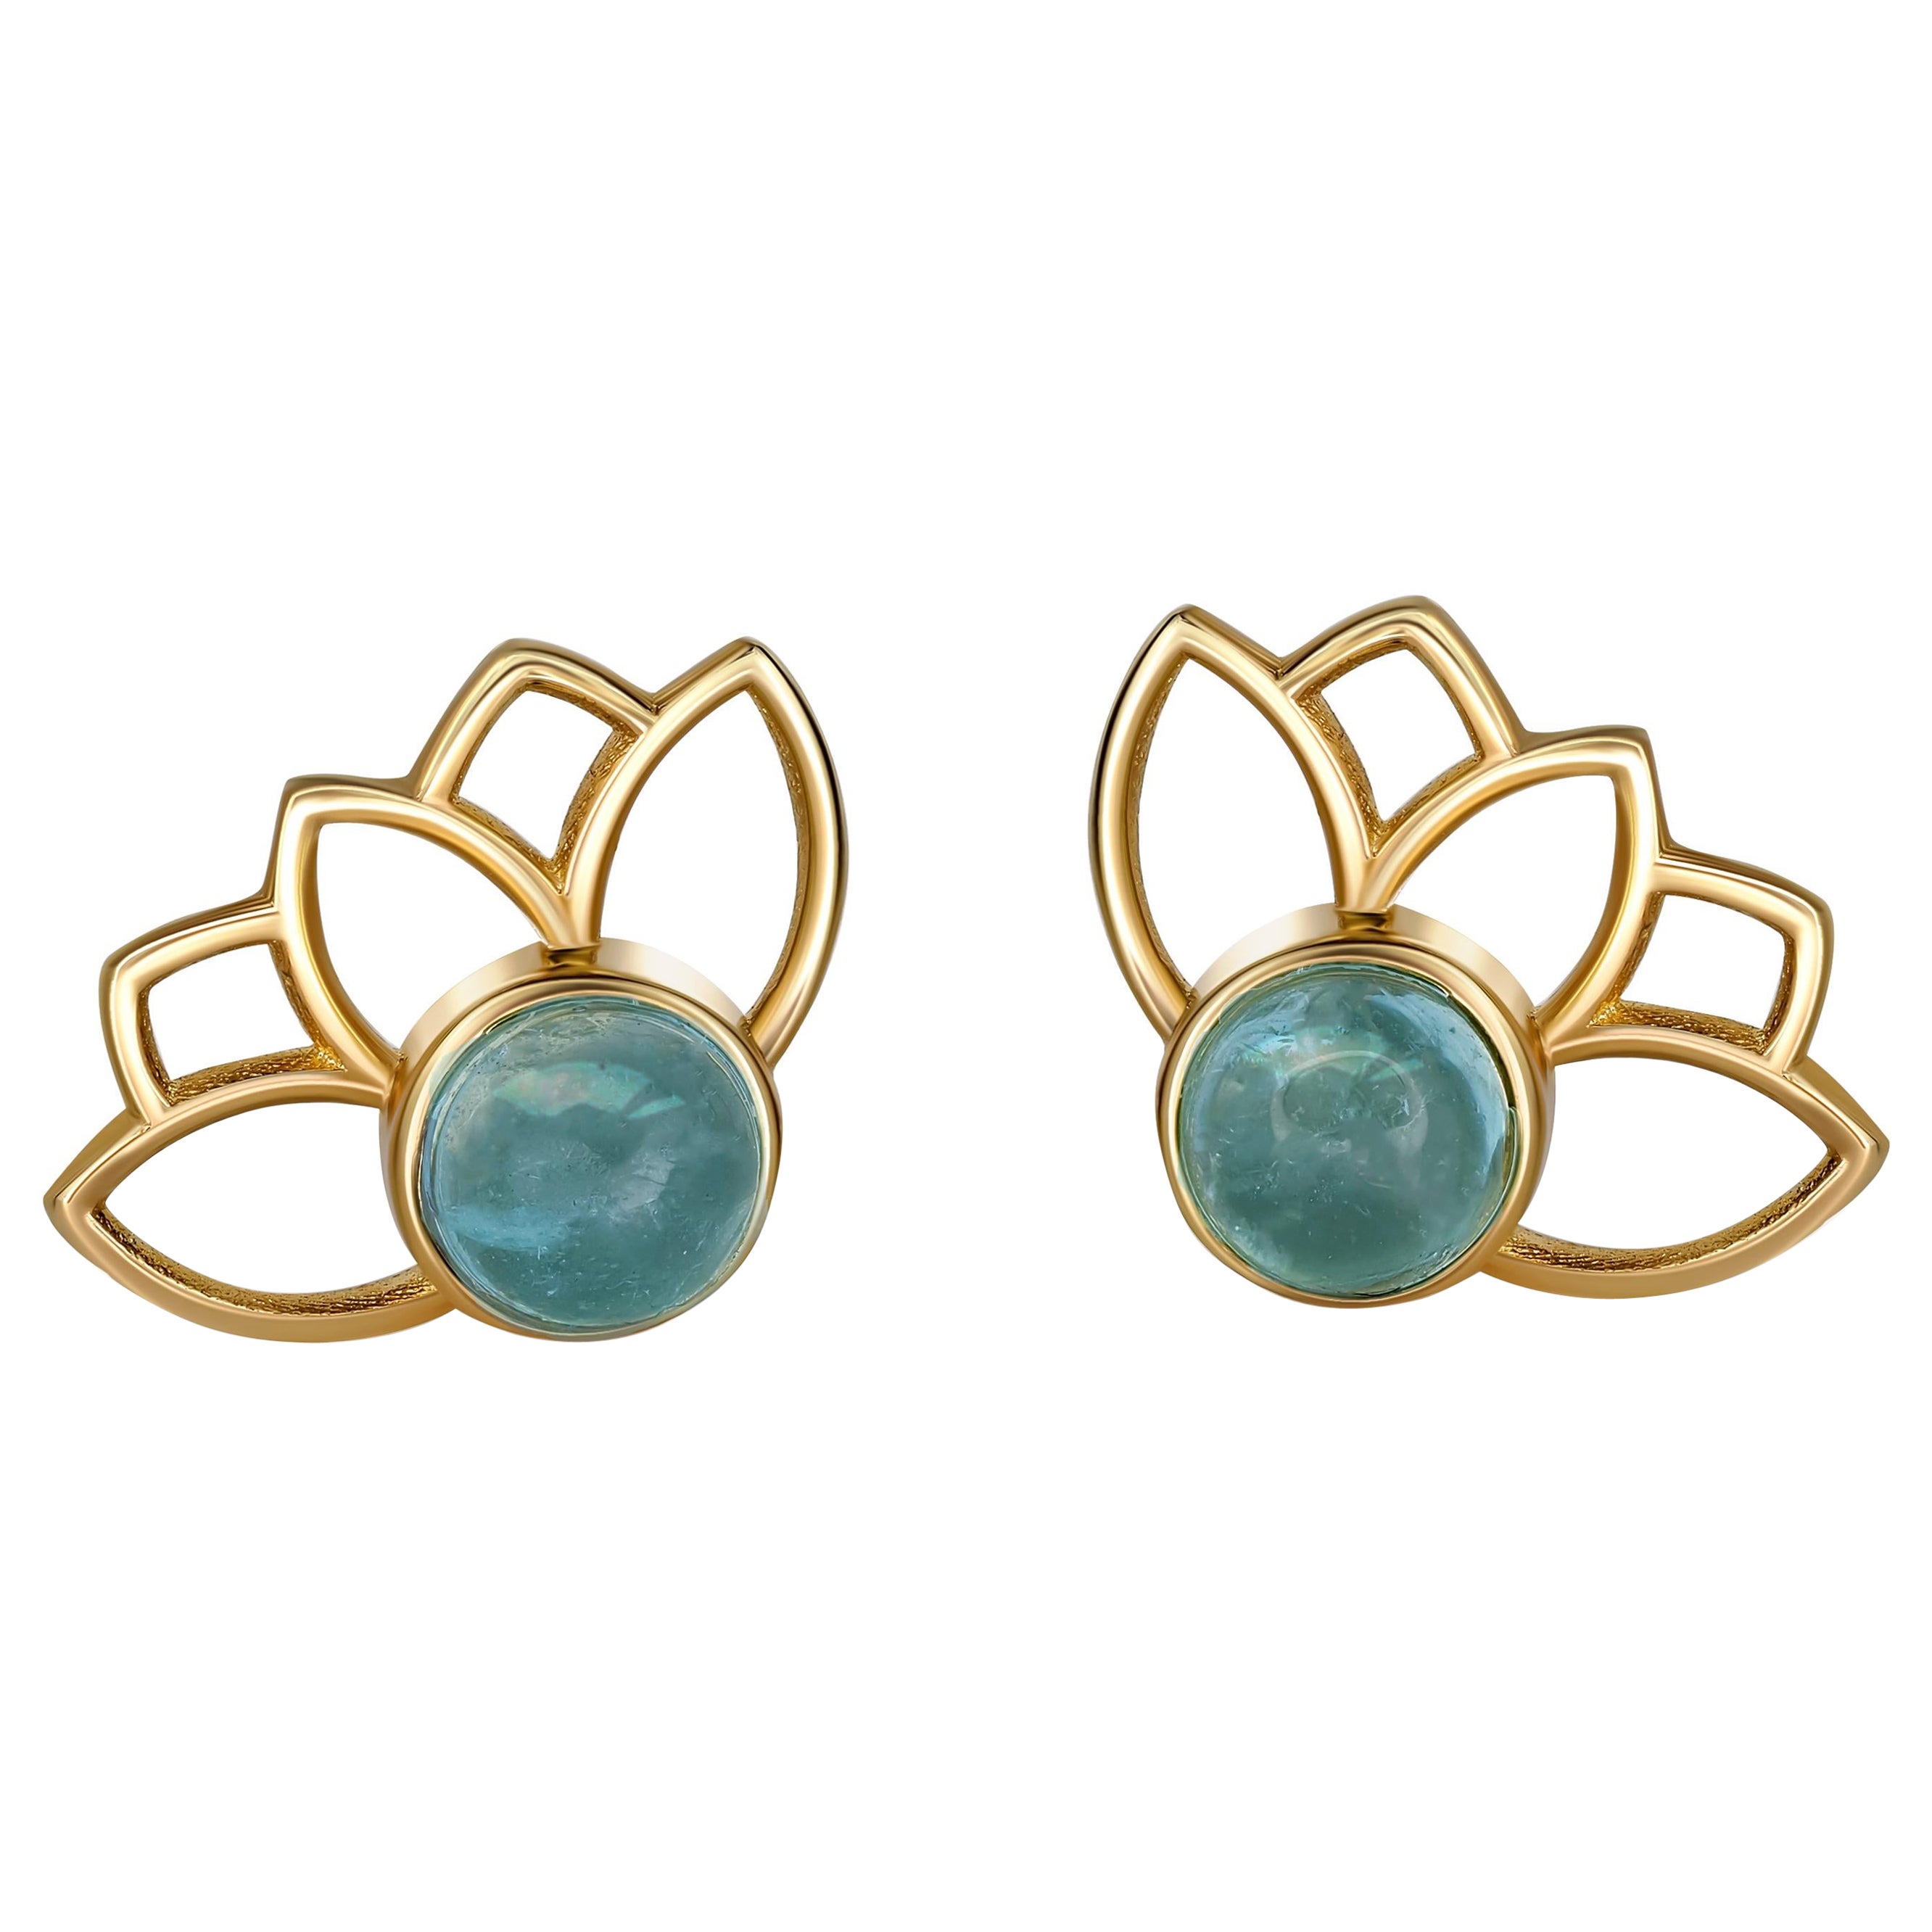 Lotus Earrings Studs with Aquamarines in 14k Gold For Sale